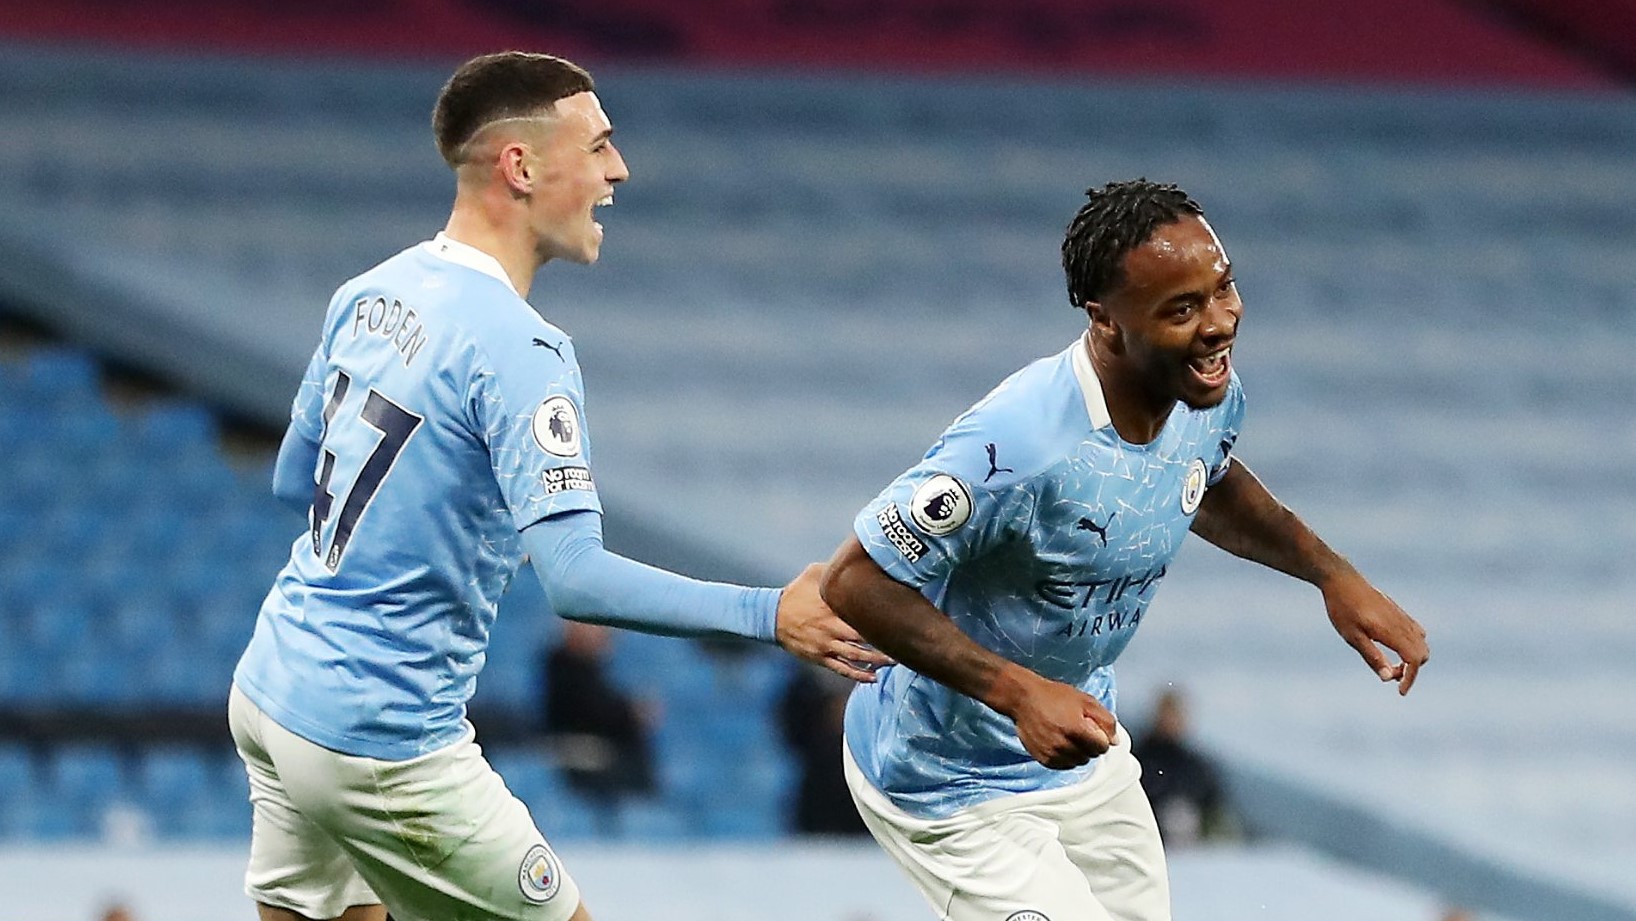 Citizens conquer: Manchester City sweep up 1-0 victory over Arsenal at home - THE SPORTS ROOM